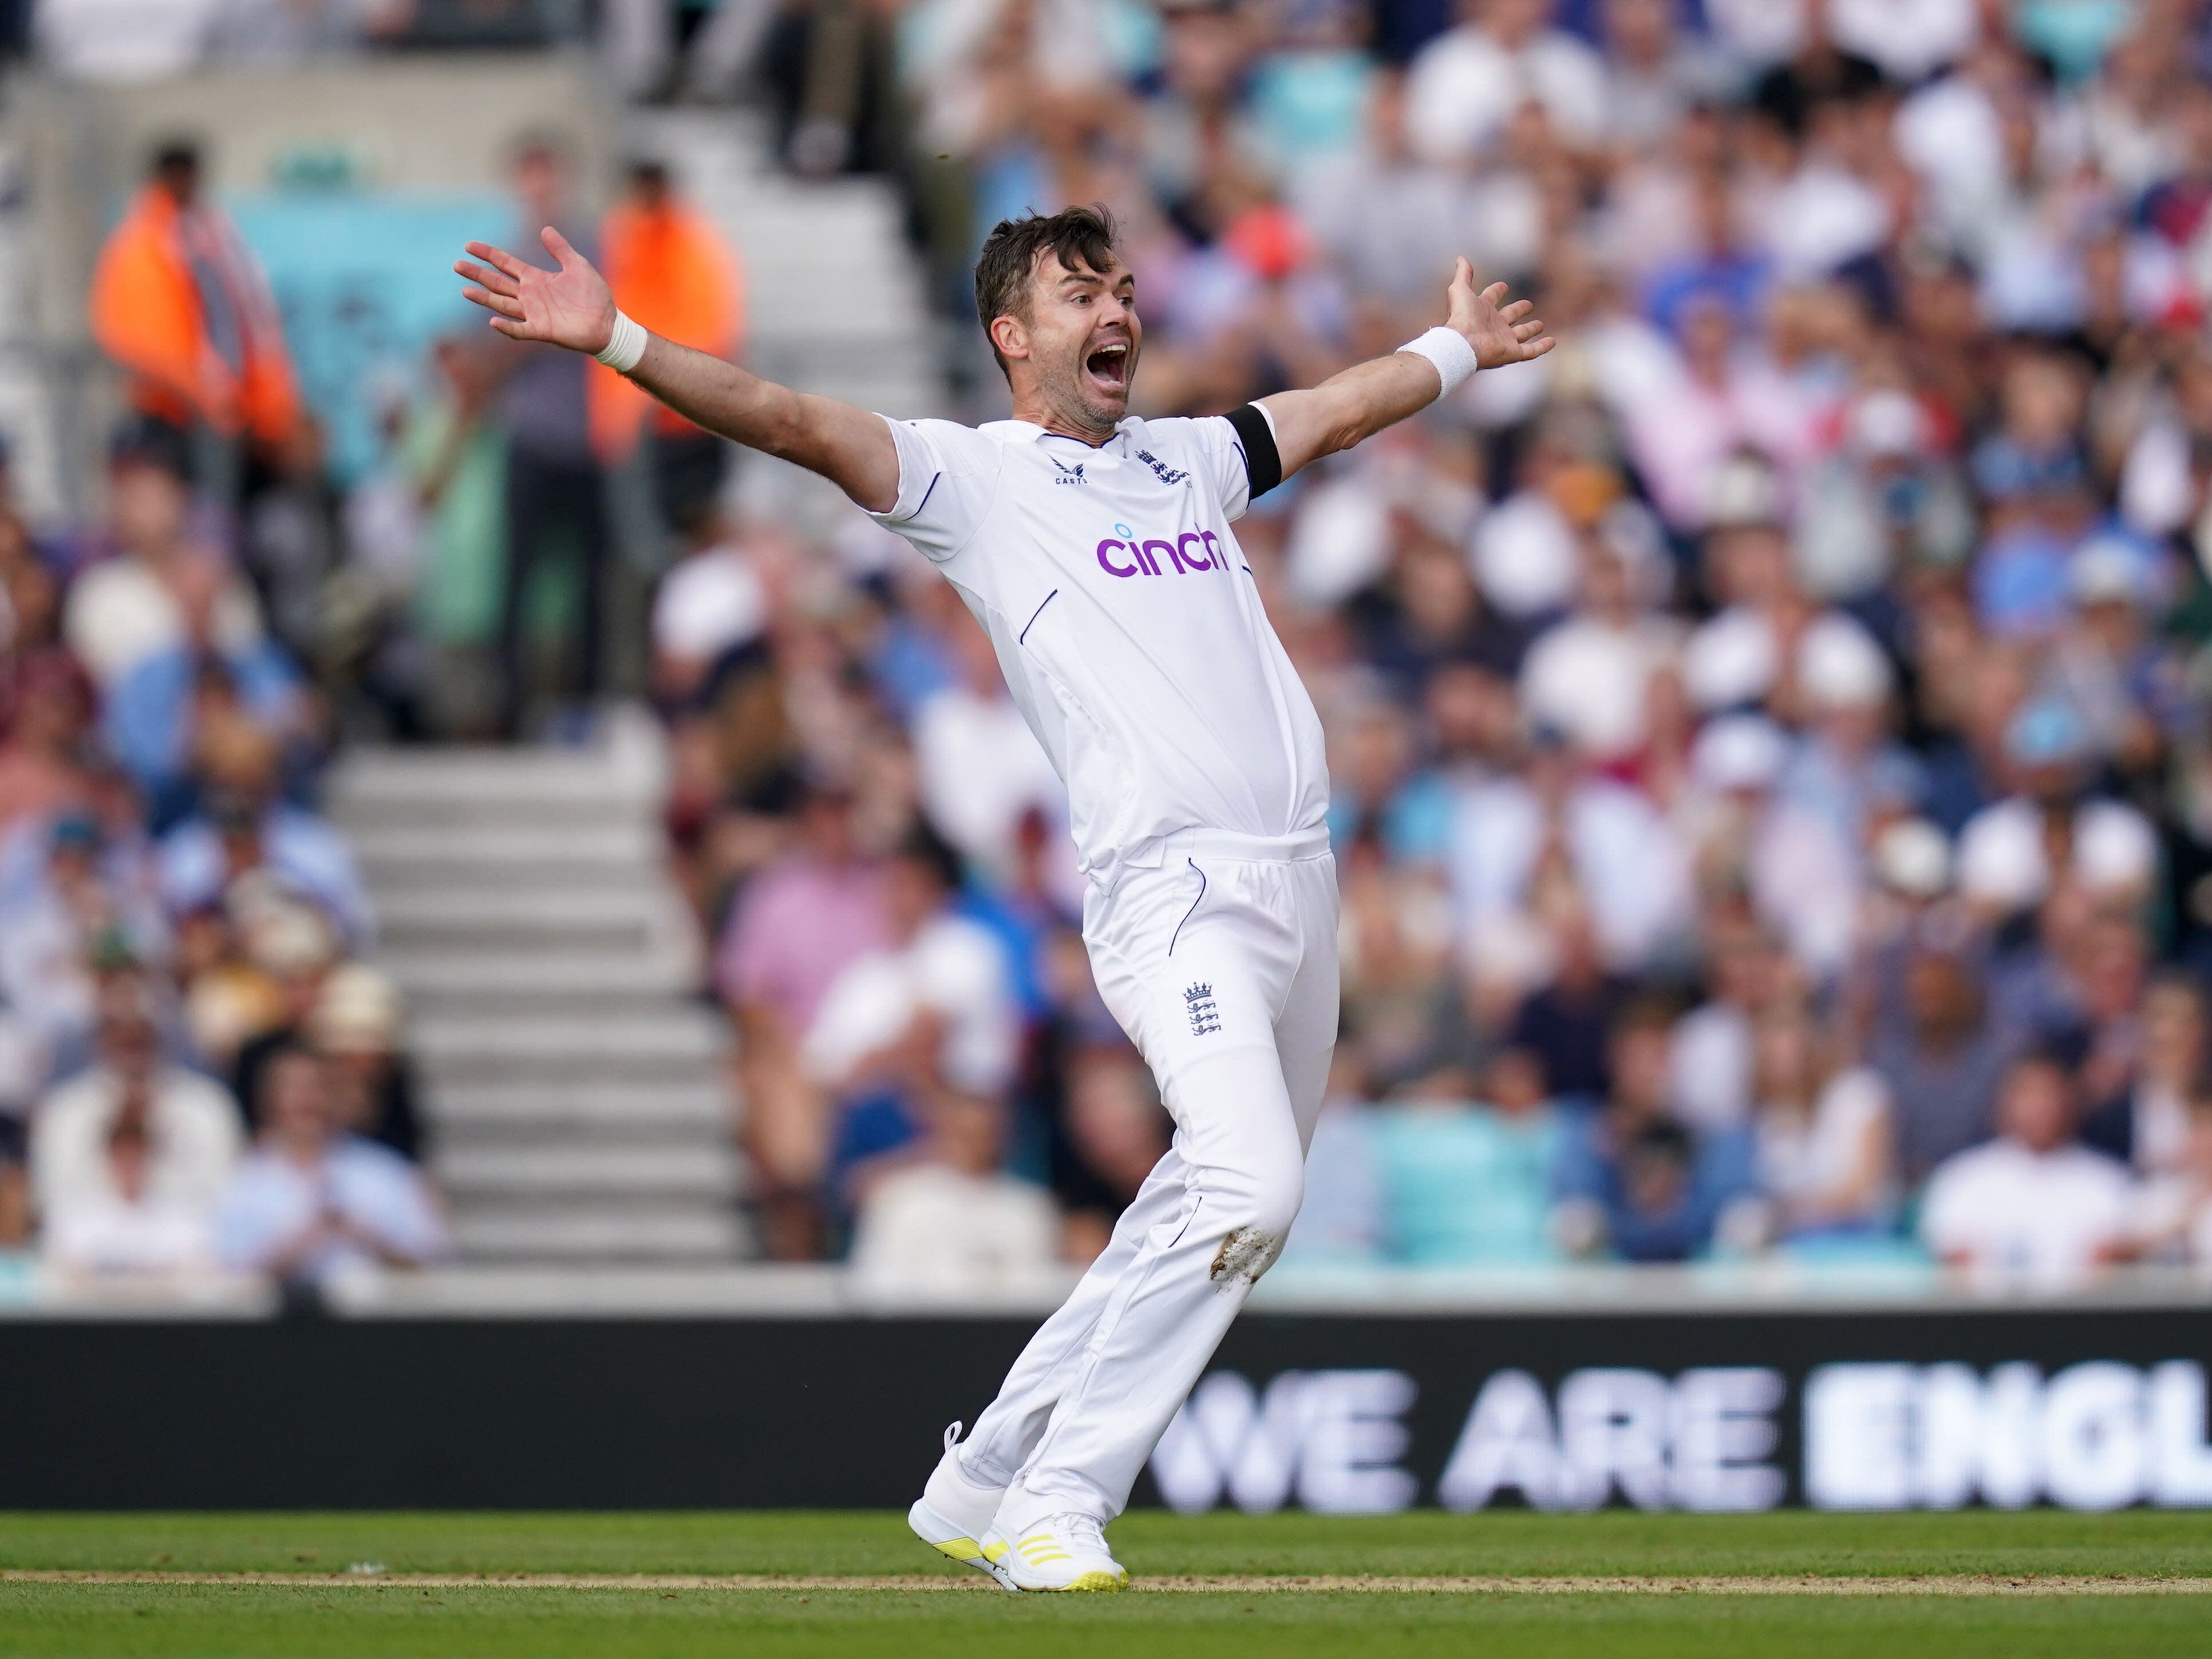 In pictures: James Anderson’s remarkable England career